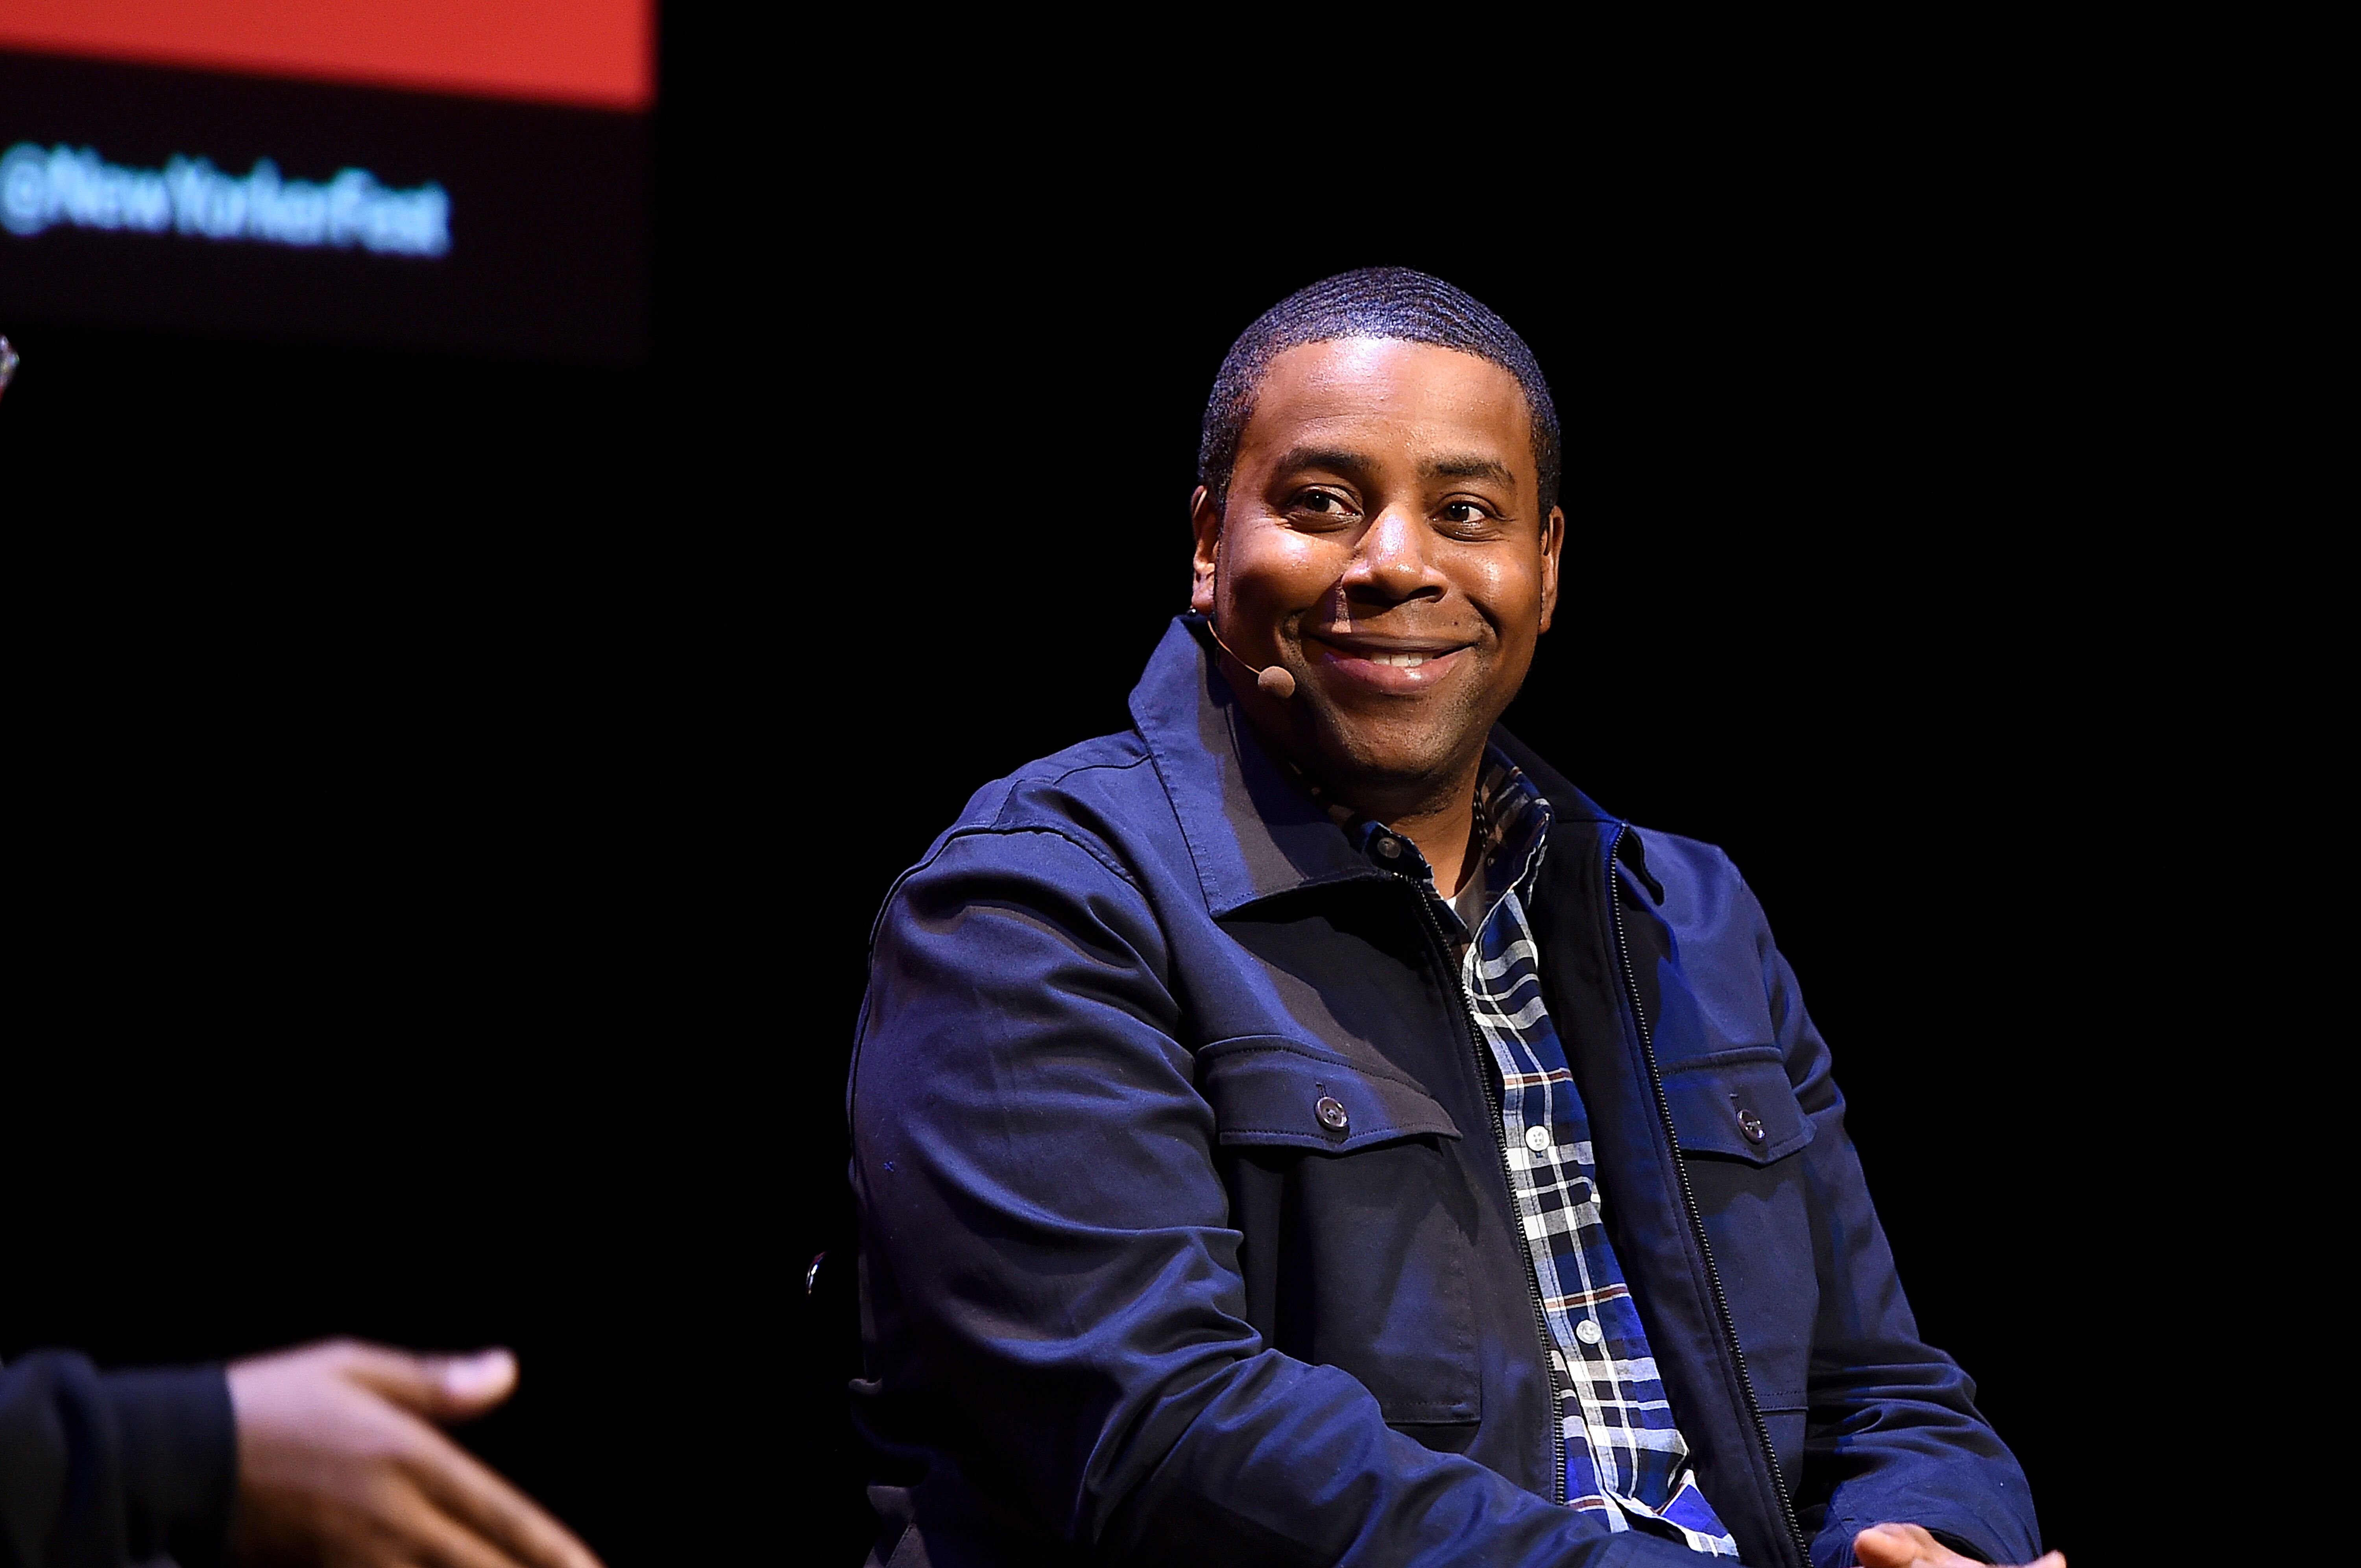  Kenan Thompson at the 2019 New Yorker Festival in 2019 | Source: Getty Images